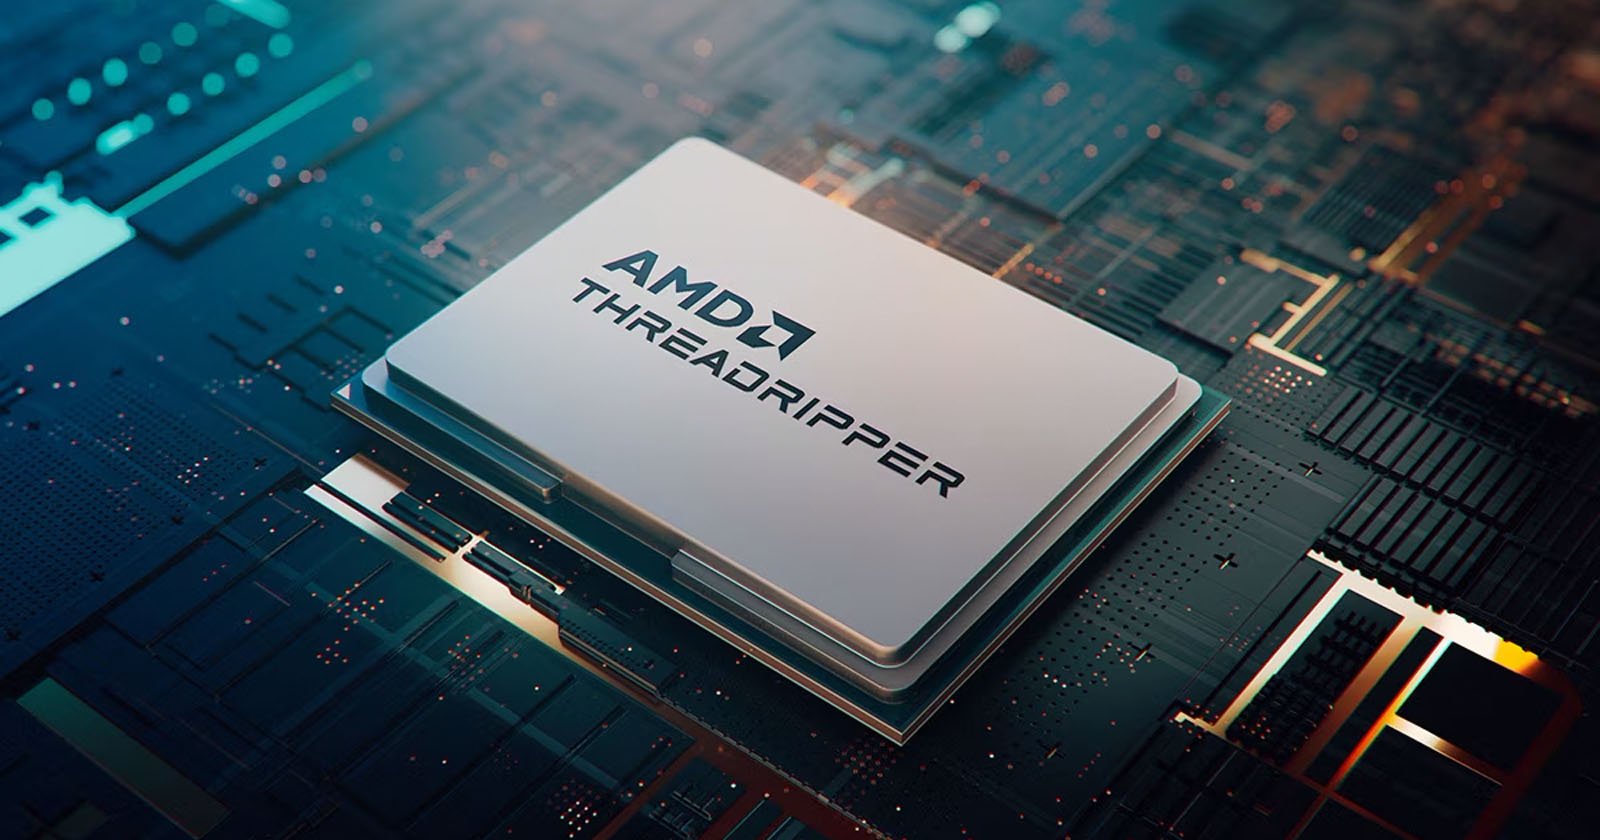 AMD Launches Threadripper CPUs for Workstations, Including 96-Core Chip